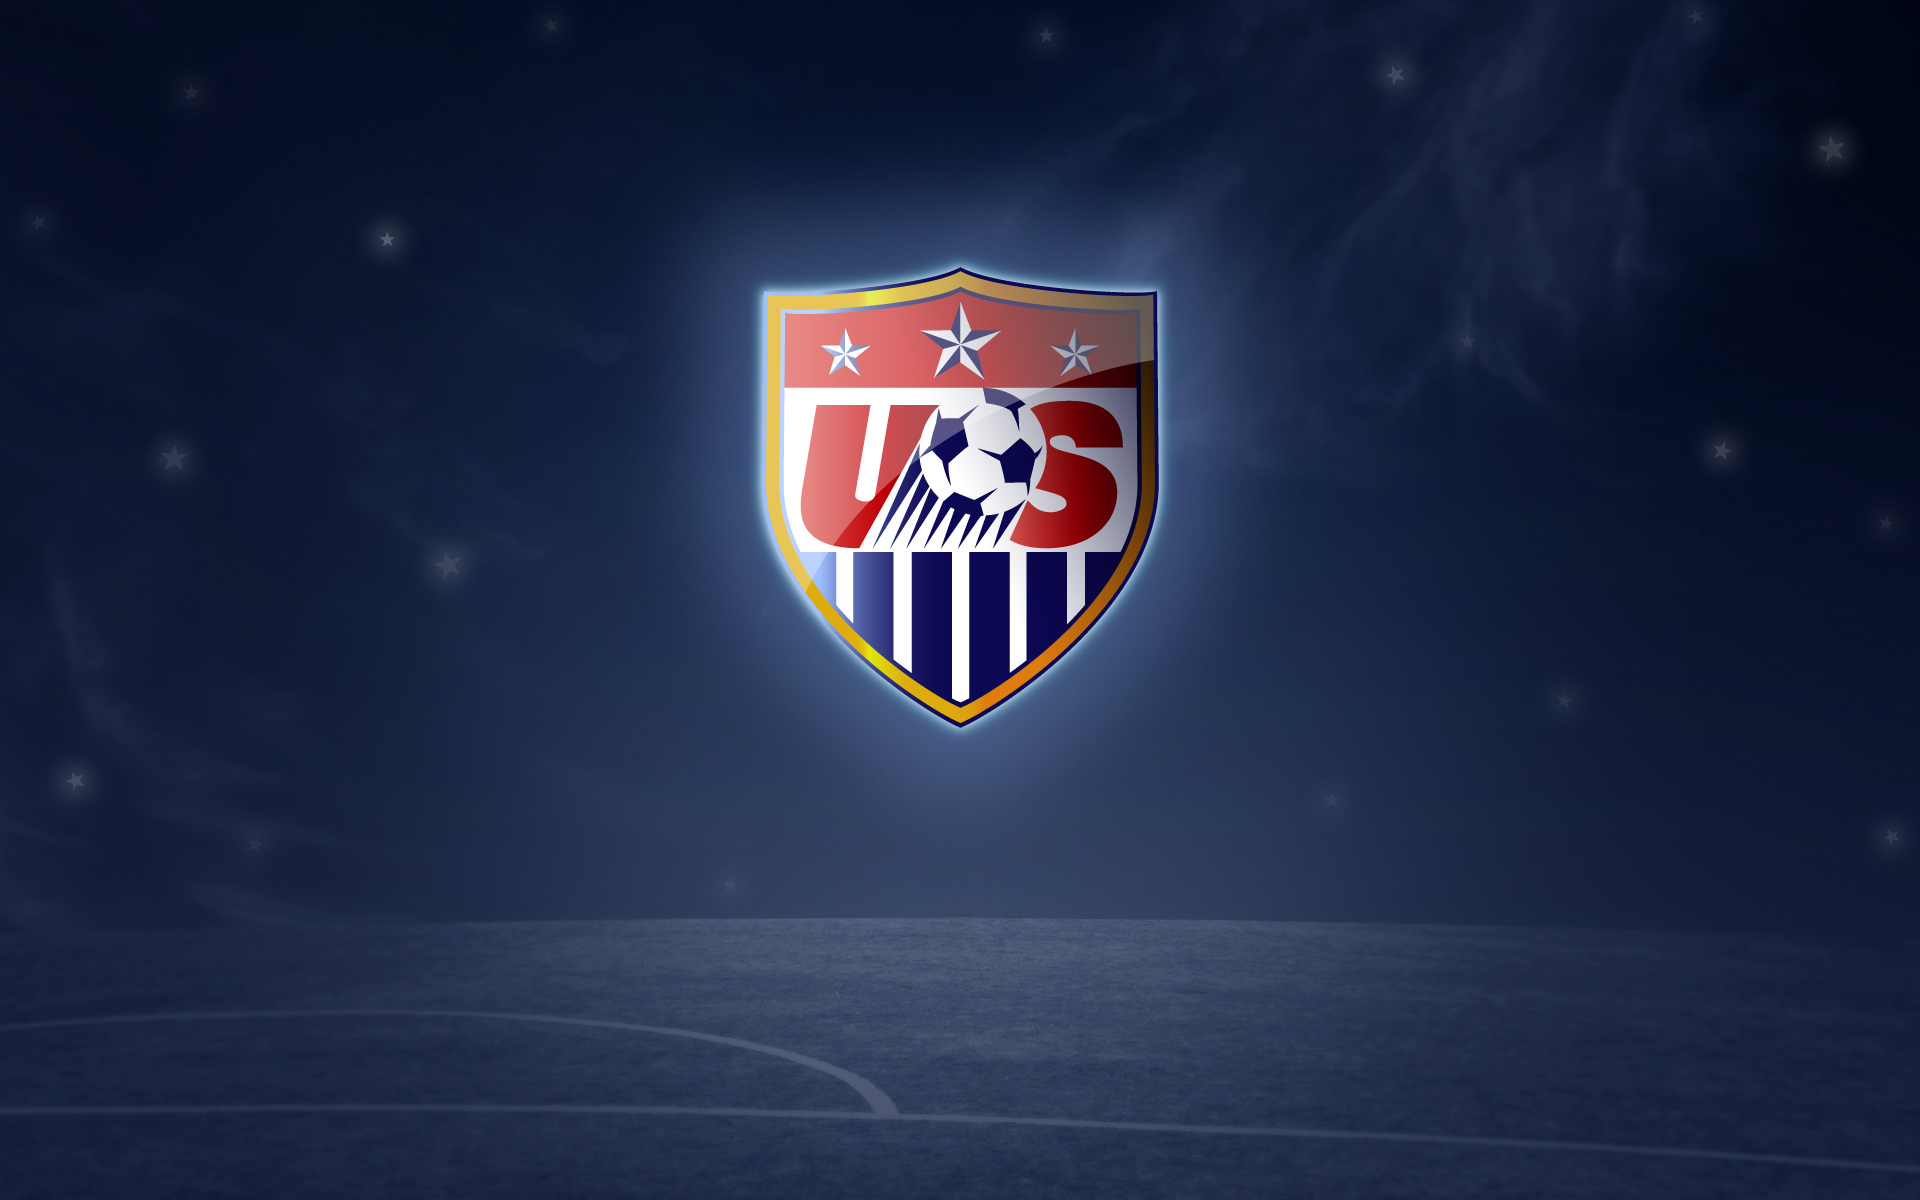 The Usa World Cup Wallpaper iPhone